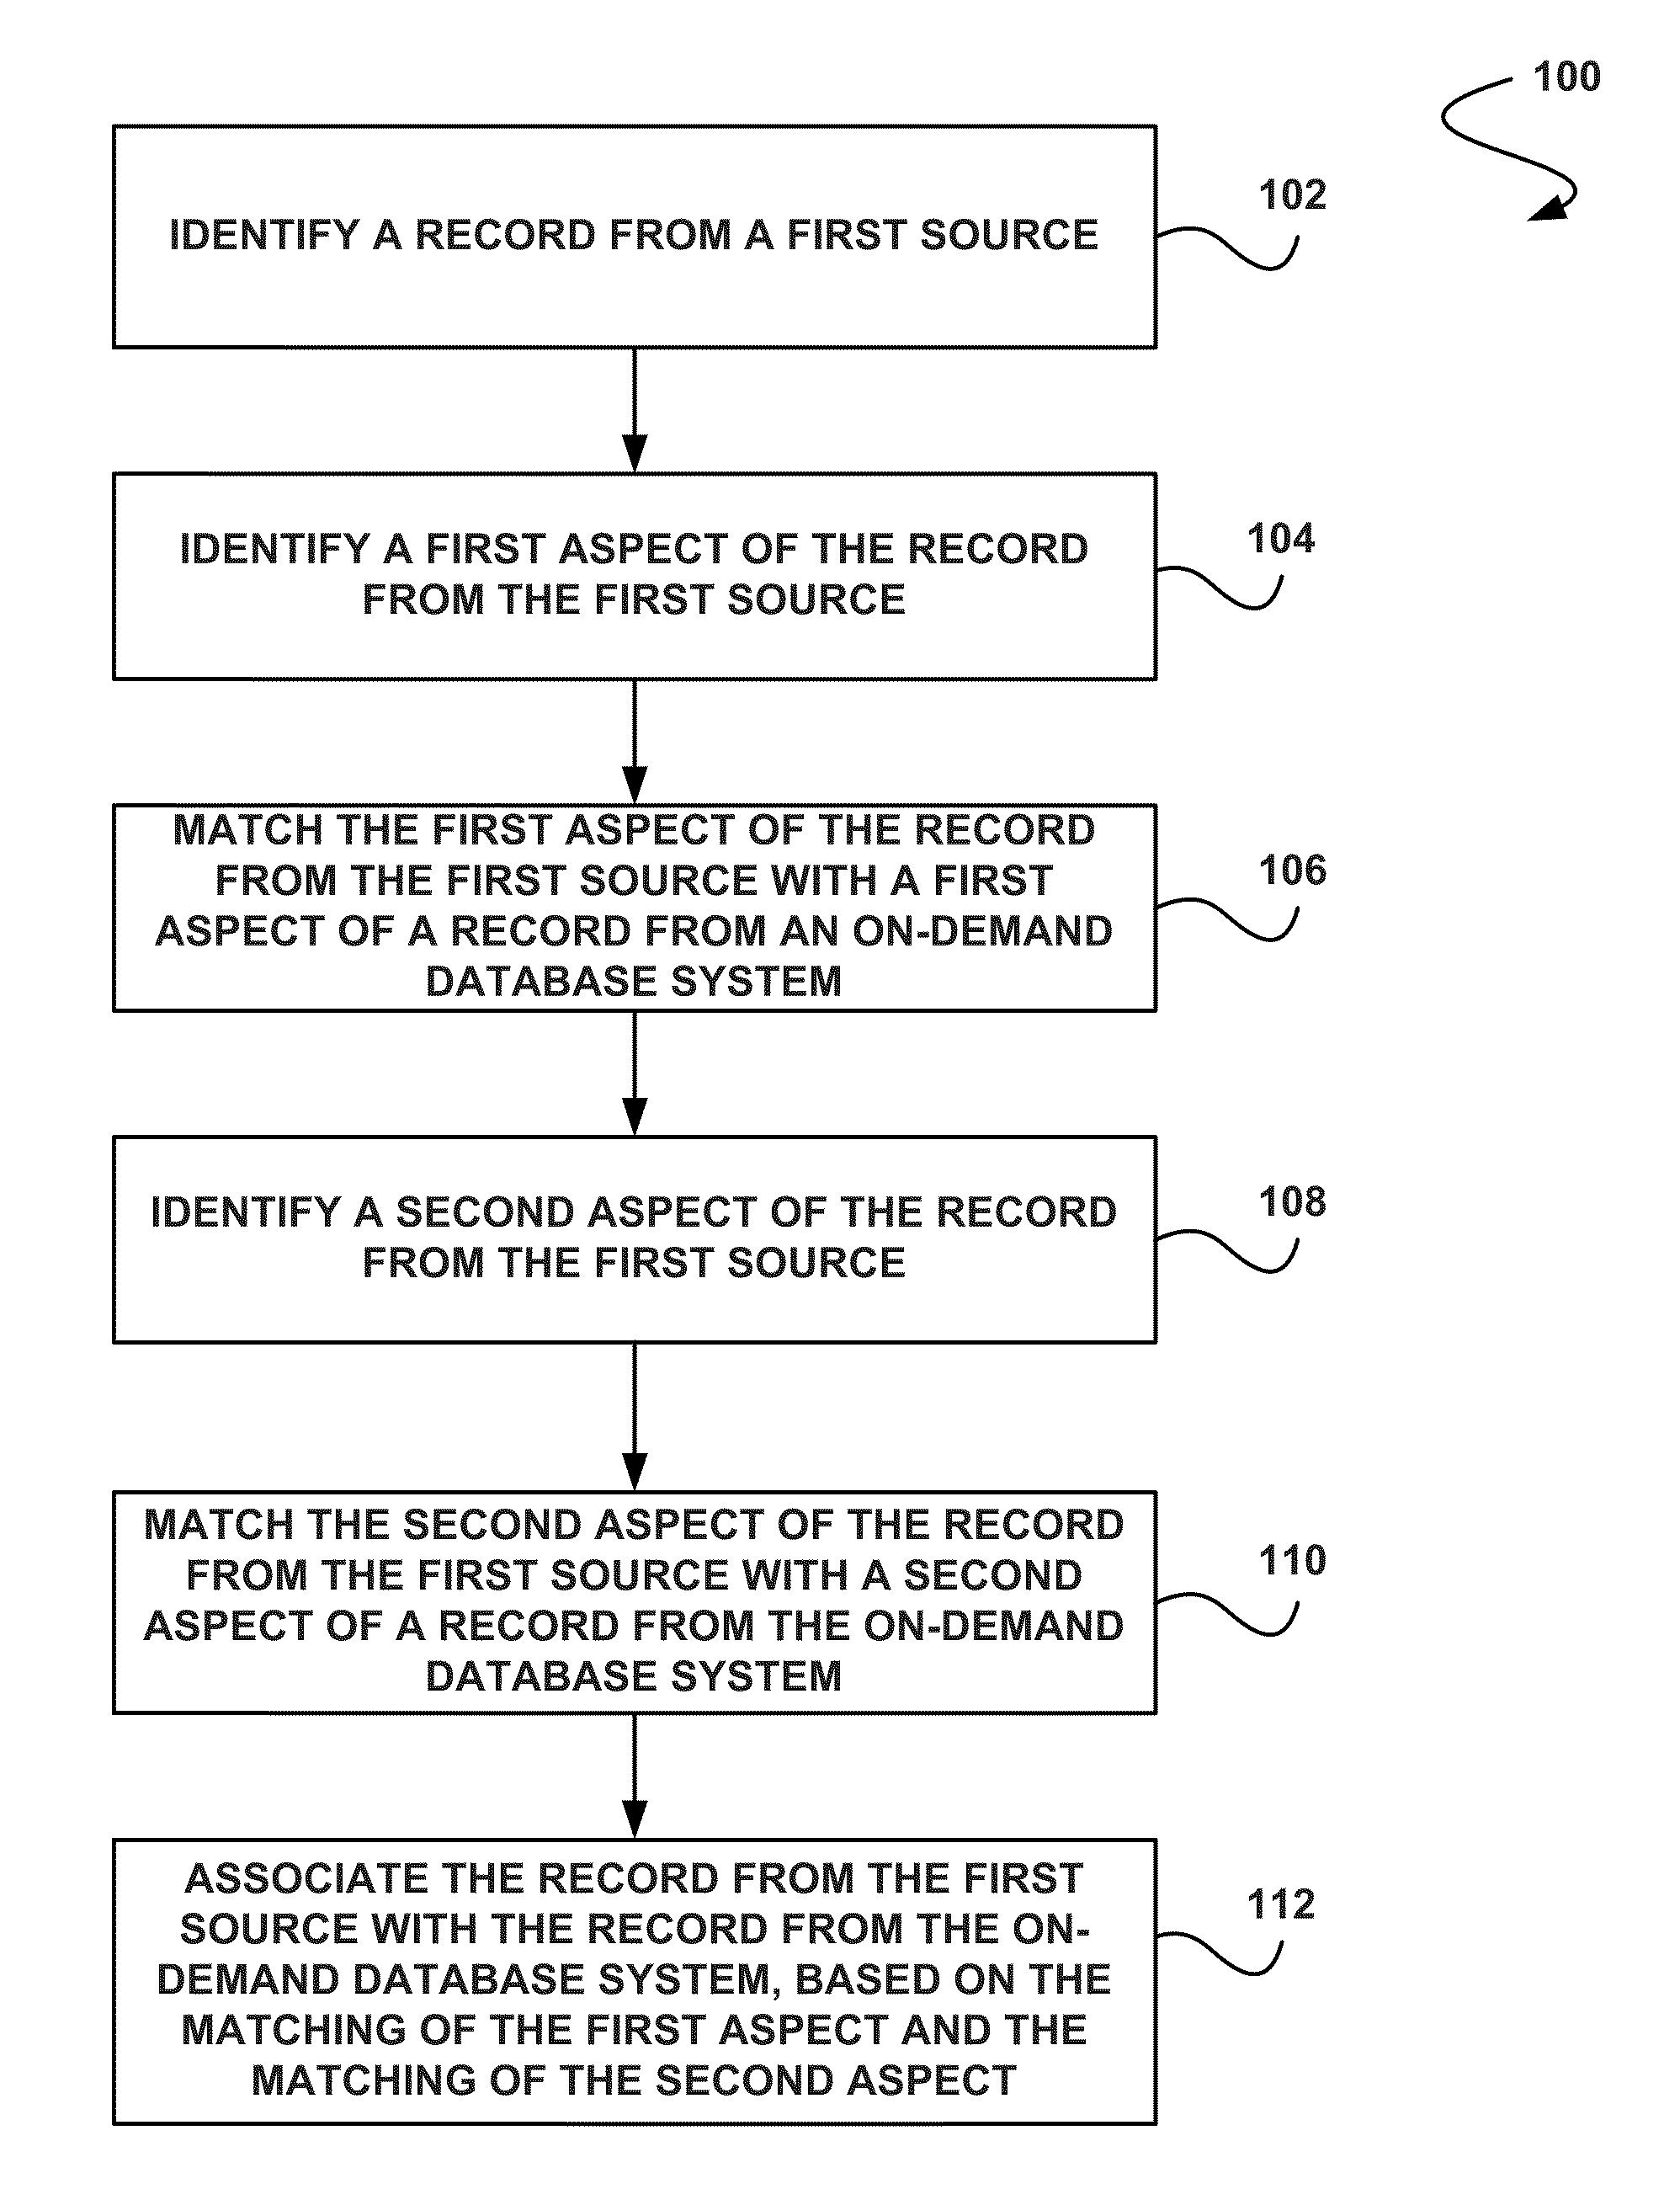 System, method and computer program product for associating a record with an account from an on-demand database system